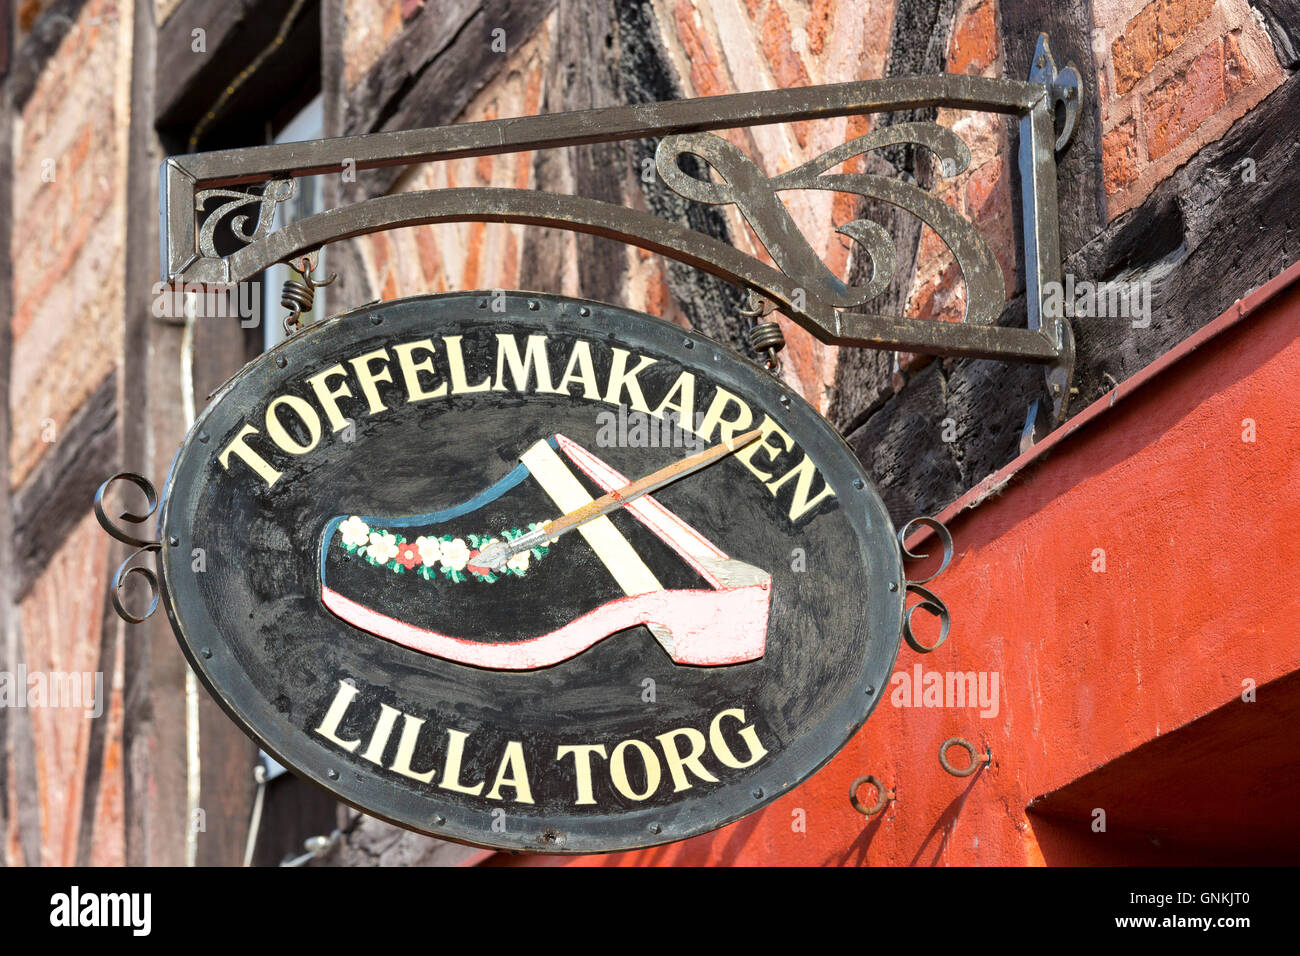 Lilla Torg clog and shoe maker shop in old town square in Malmo, Sweden Stock Photo